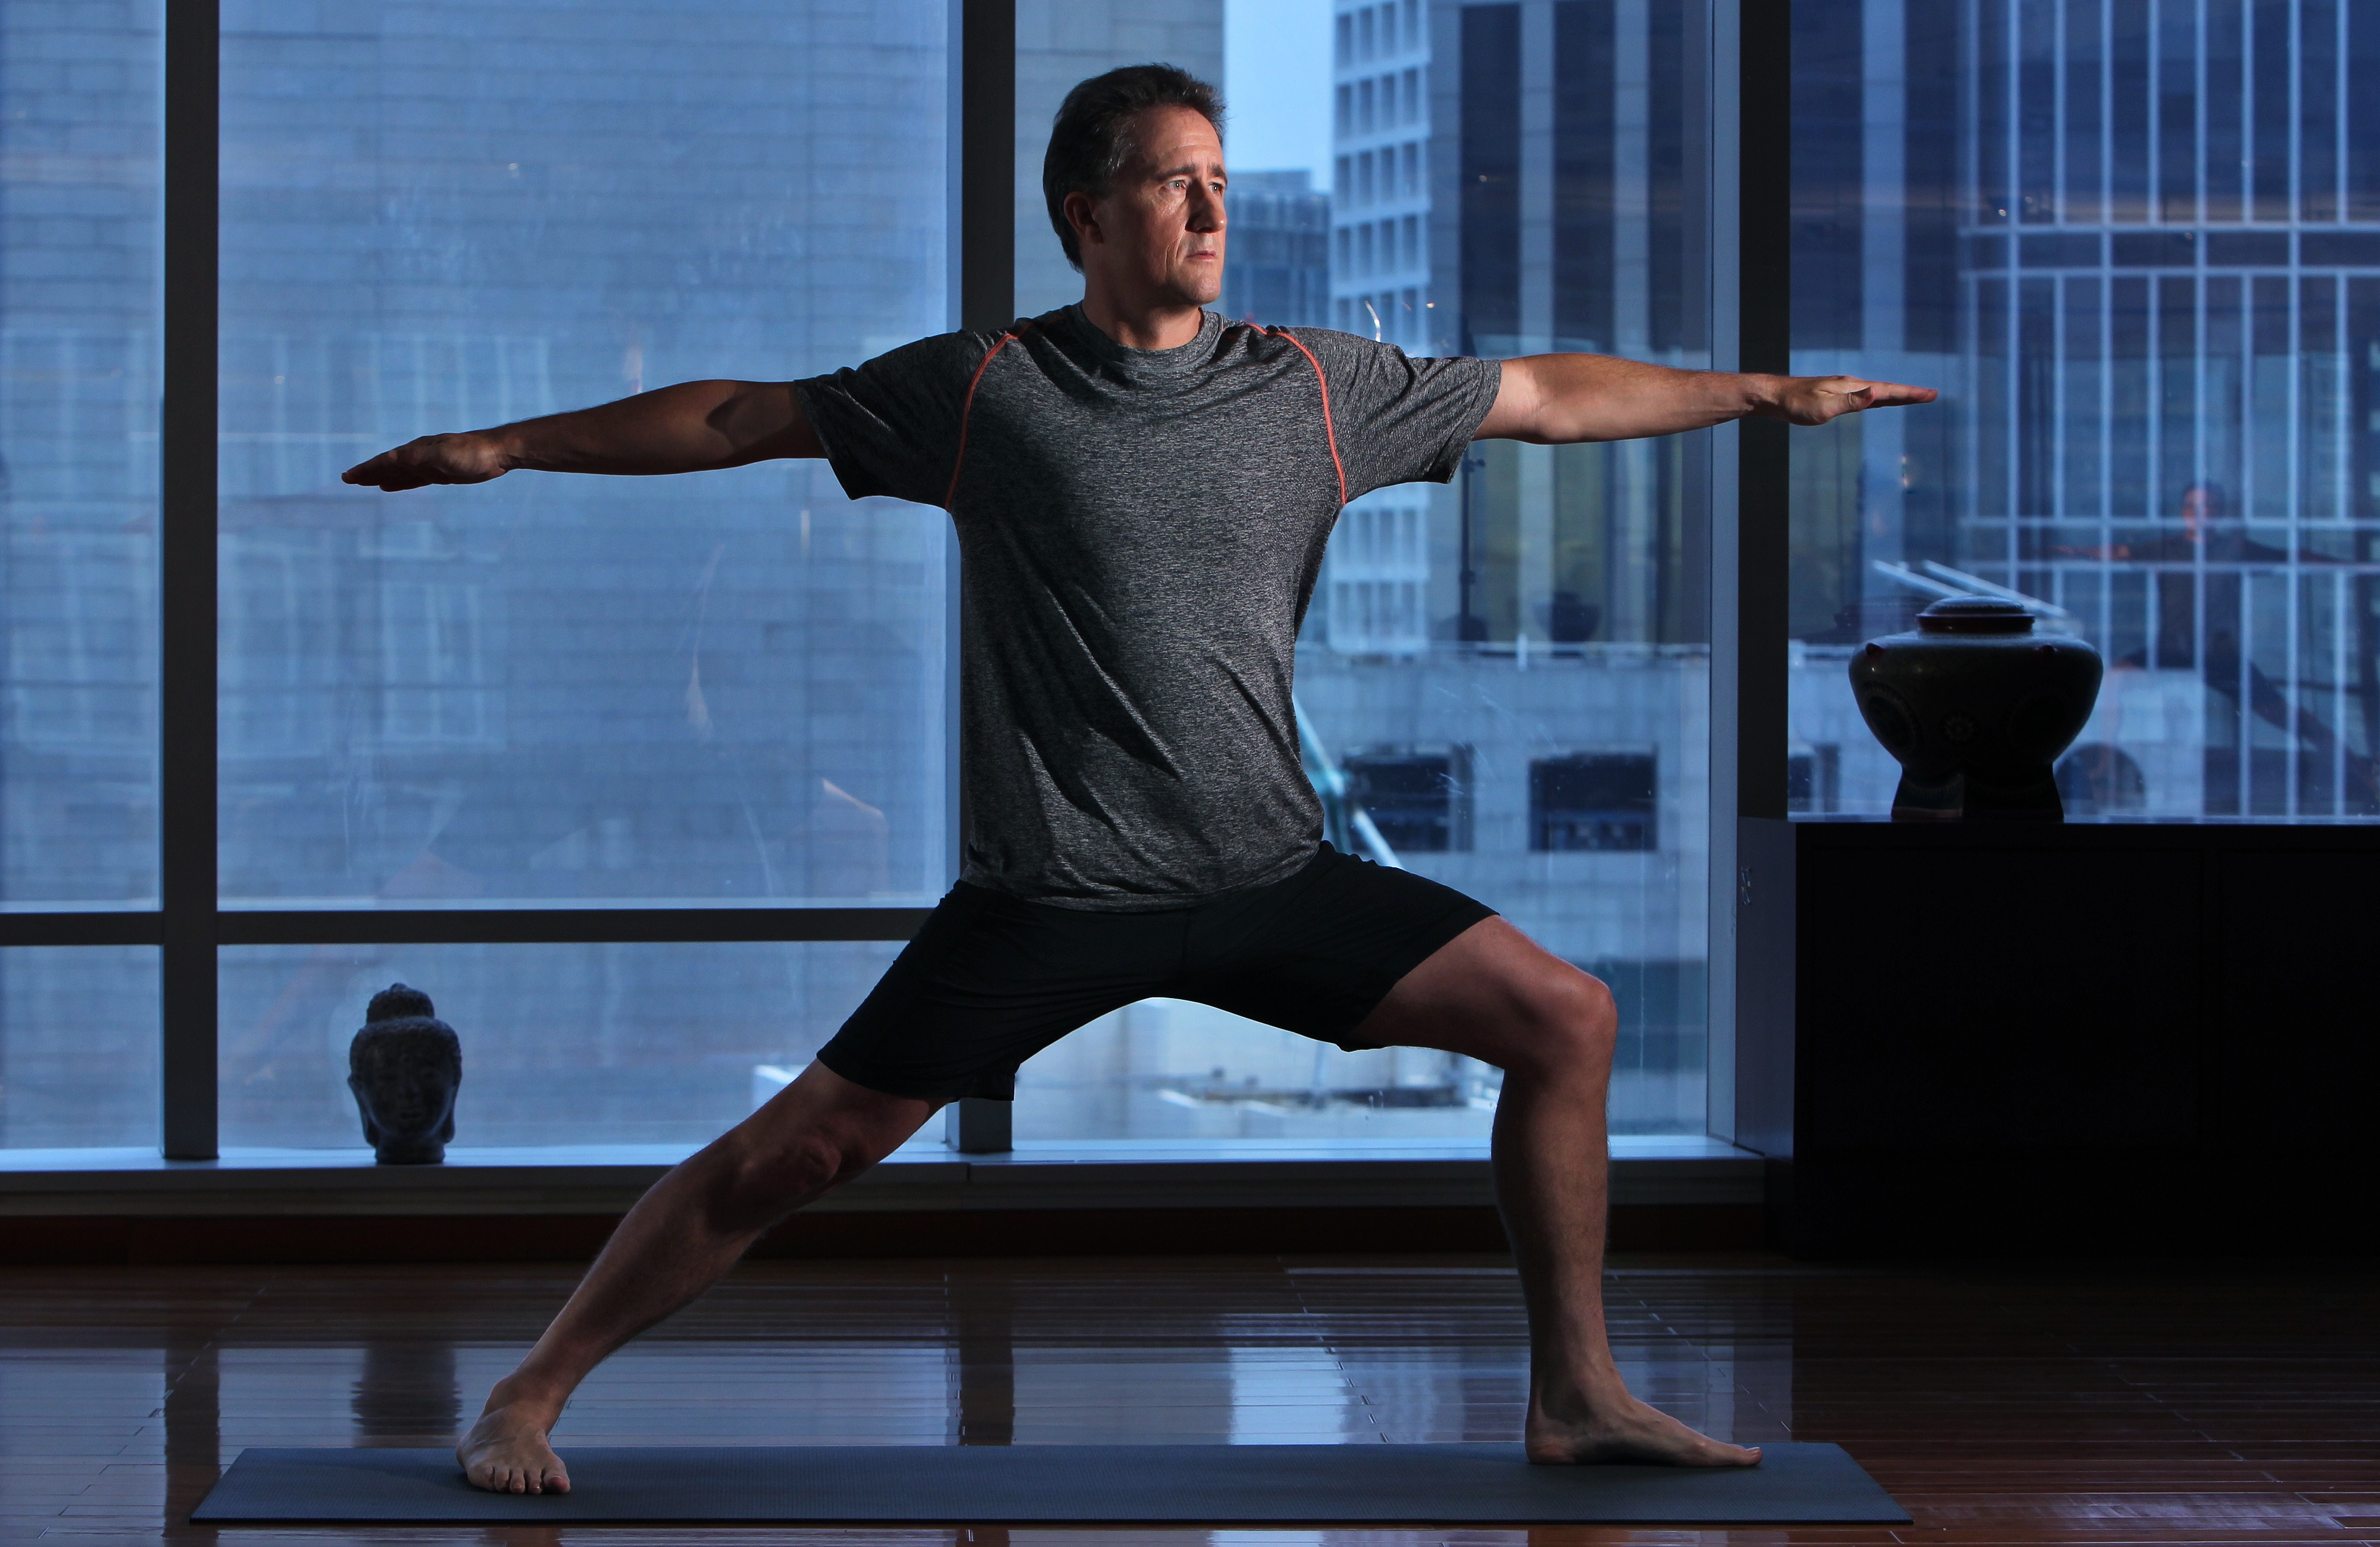 Colin Grant says yoga has taught him, among other things, that “for people to exercise, they’ve got to be ready, you can’t force it on them”. Pictures: SCMP